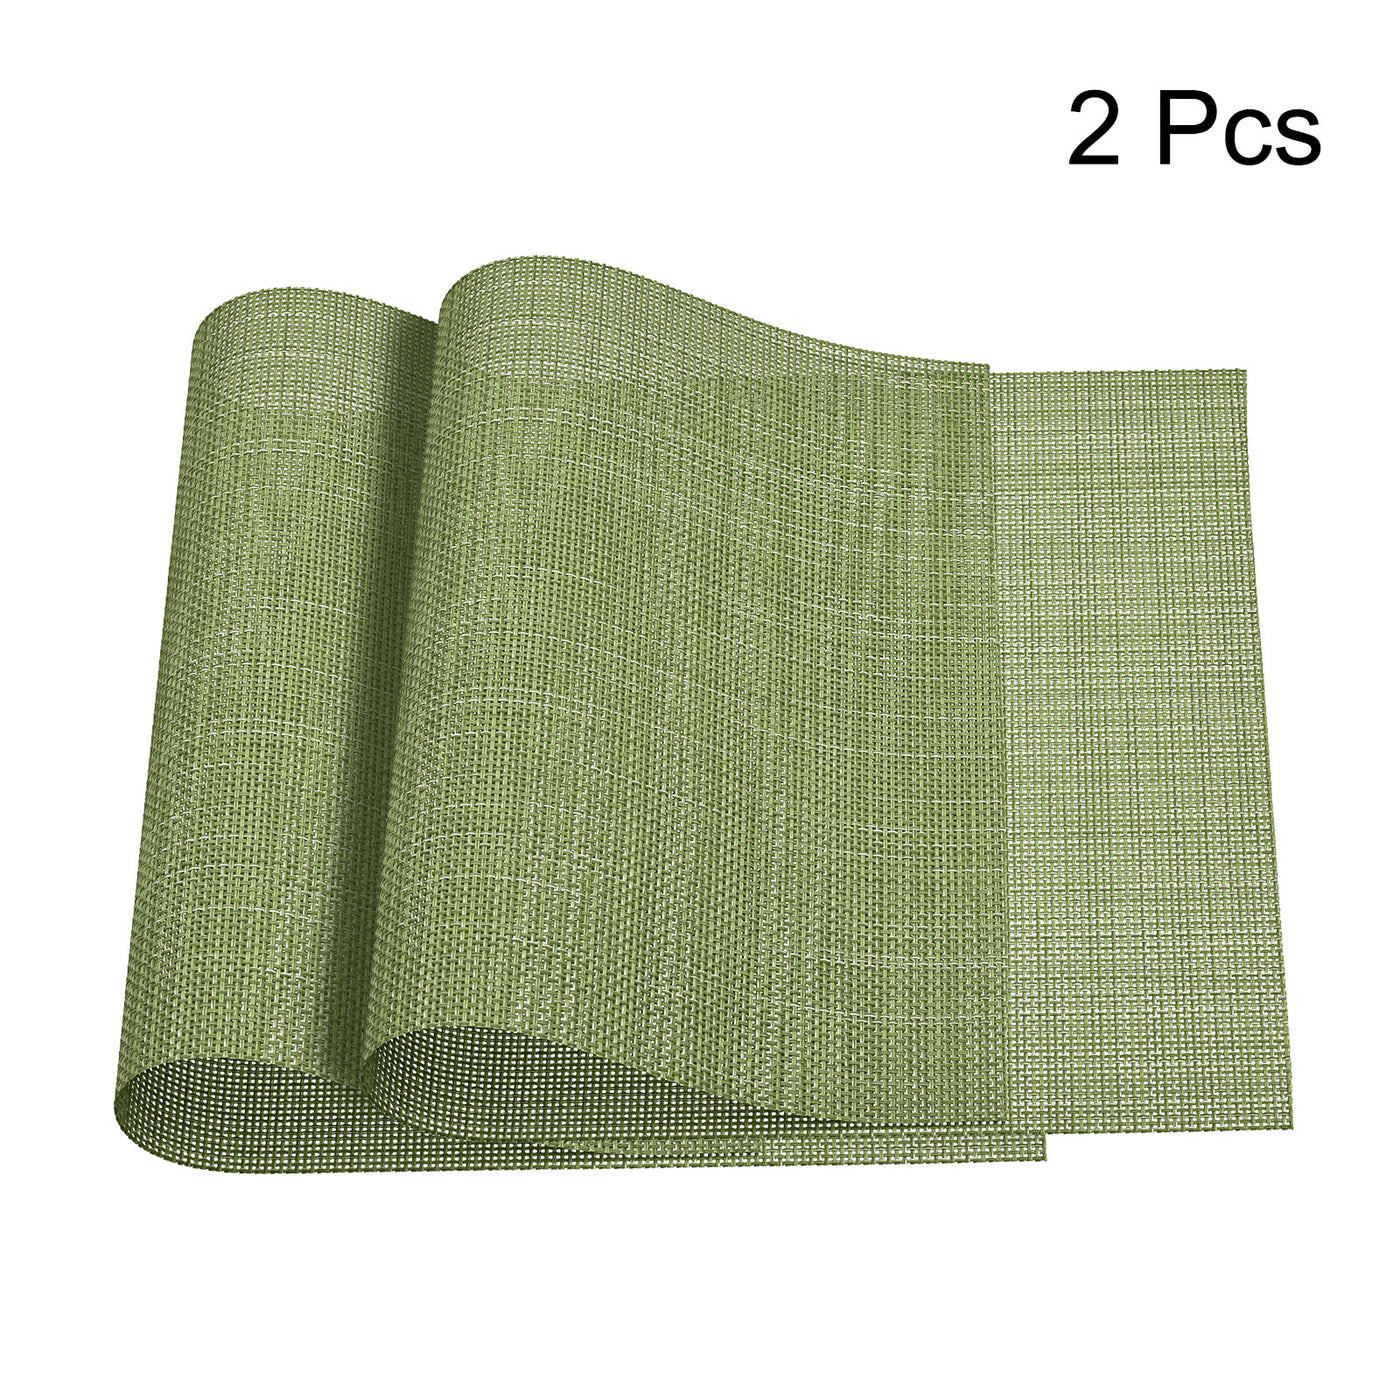 uxcell Uxcell Place Mats 450x300mm Table Mats Set of 2 PVC Washable Woven Placemat Grass Green